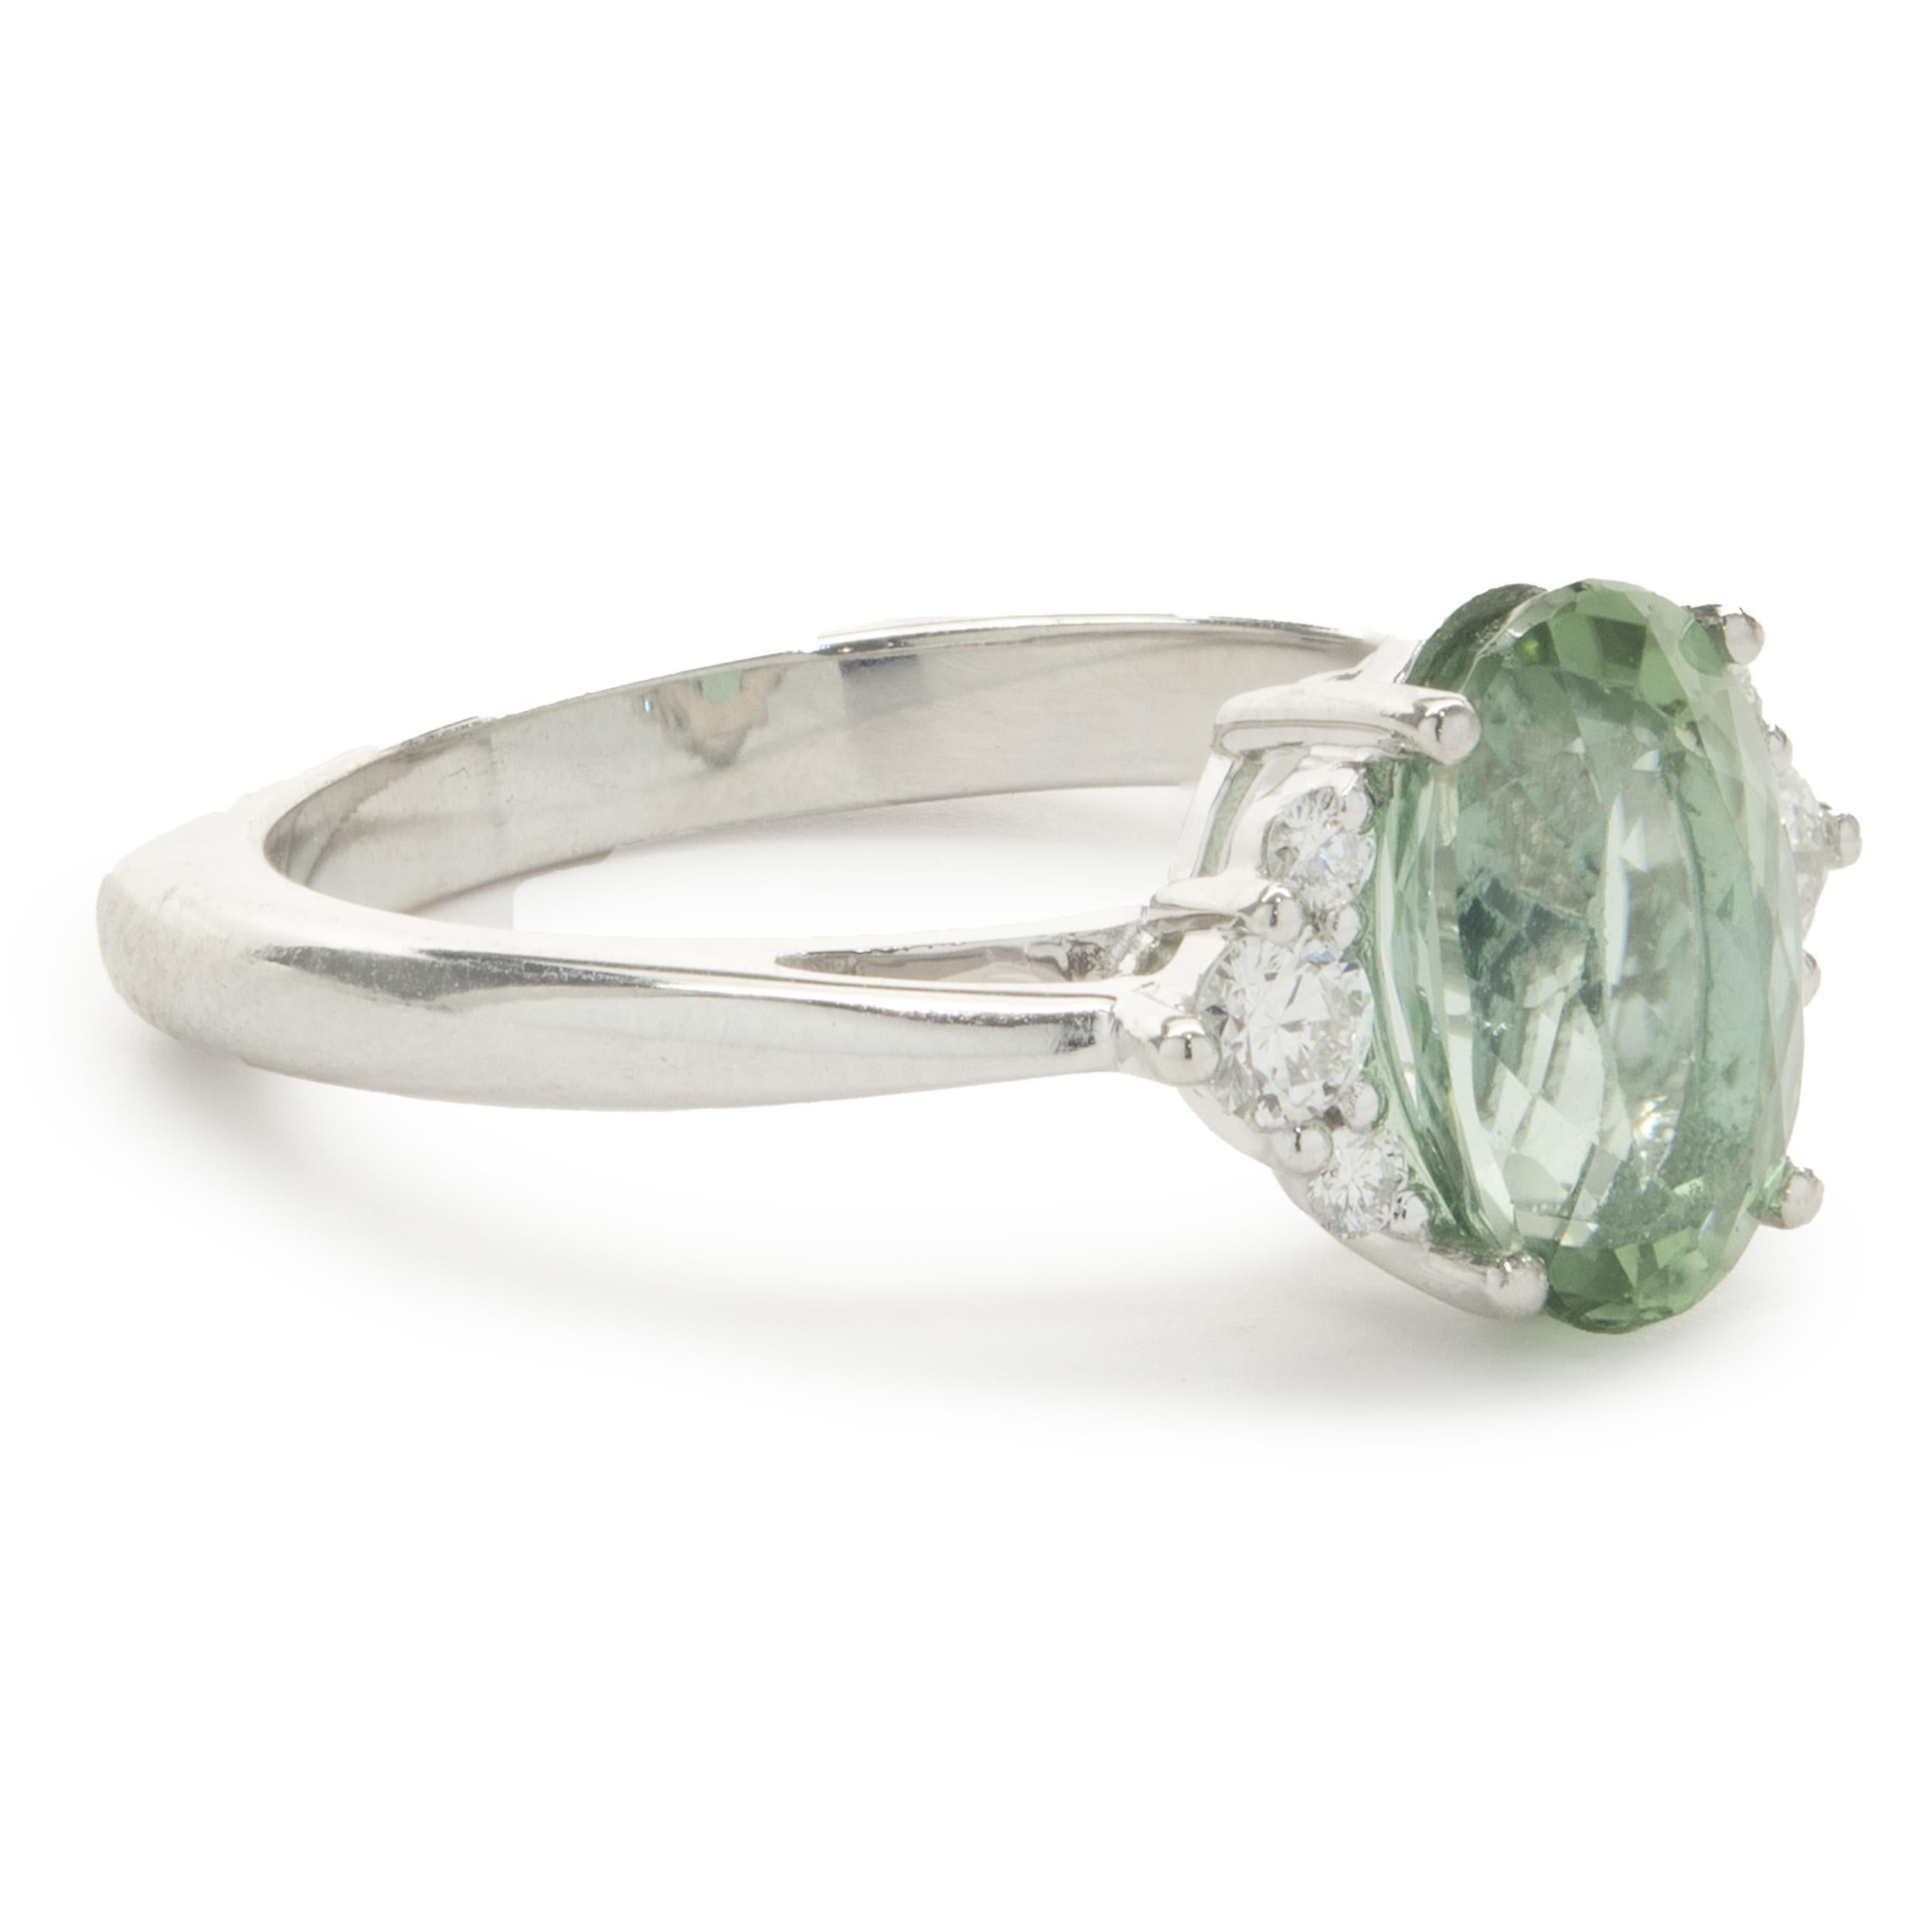 Designer: custom
Material: 14K white gold
Diamond: 6 round brilliant cut = .38cttw
Color: G
Clarity: VS2
Tourmaline: 1 oval cut = 2.56ct
Color: Mint Green
Clarity: AA
Dimensions: ring top measures 10.50mm wide
Ring Size: 7.5 (complimentary sizing